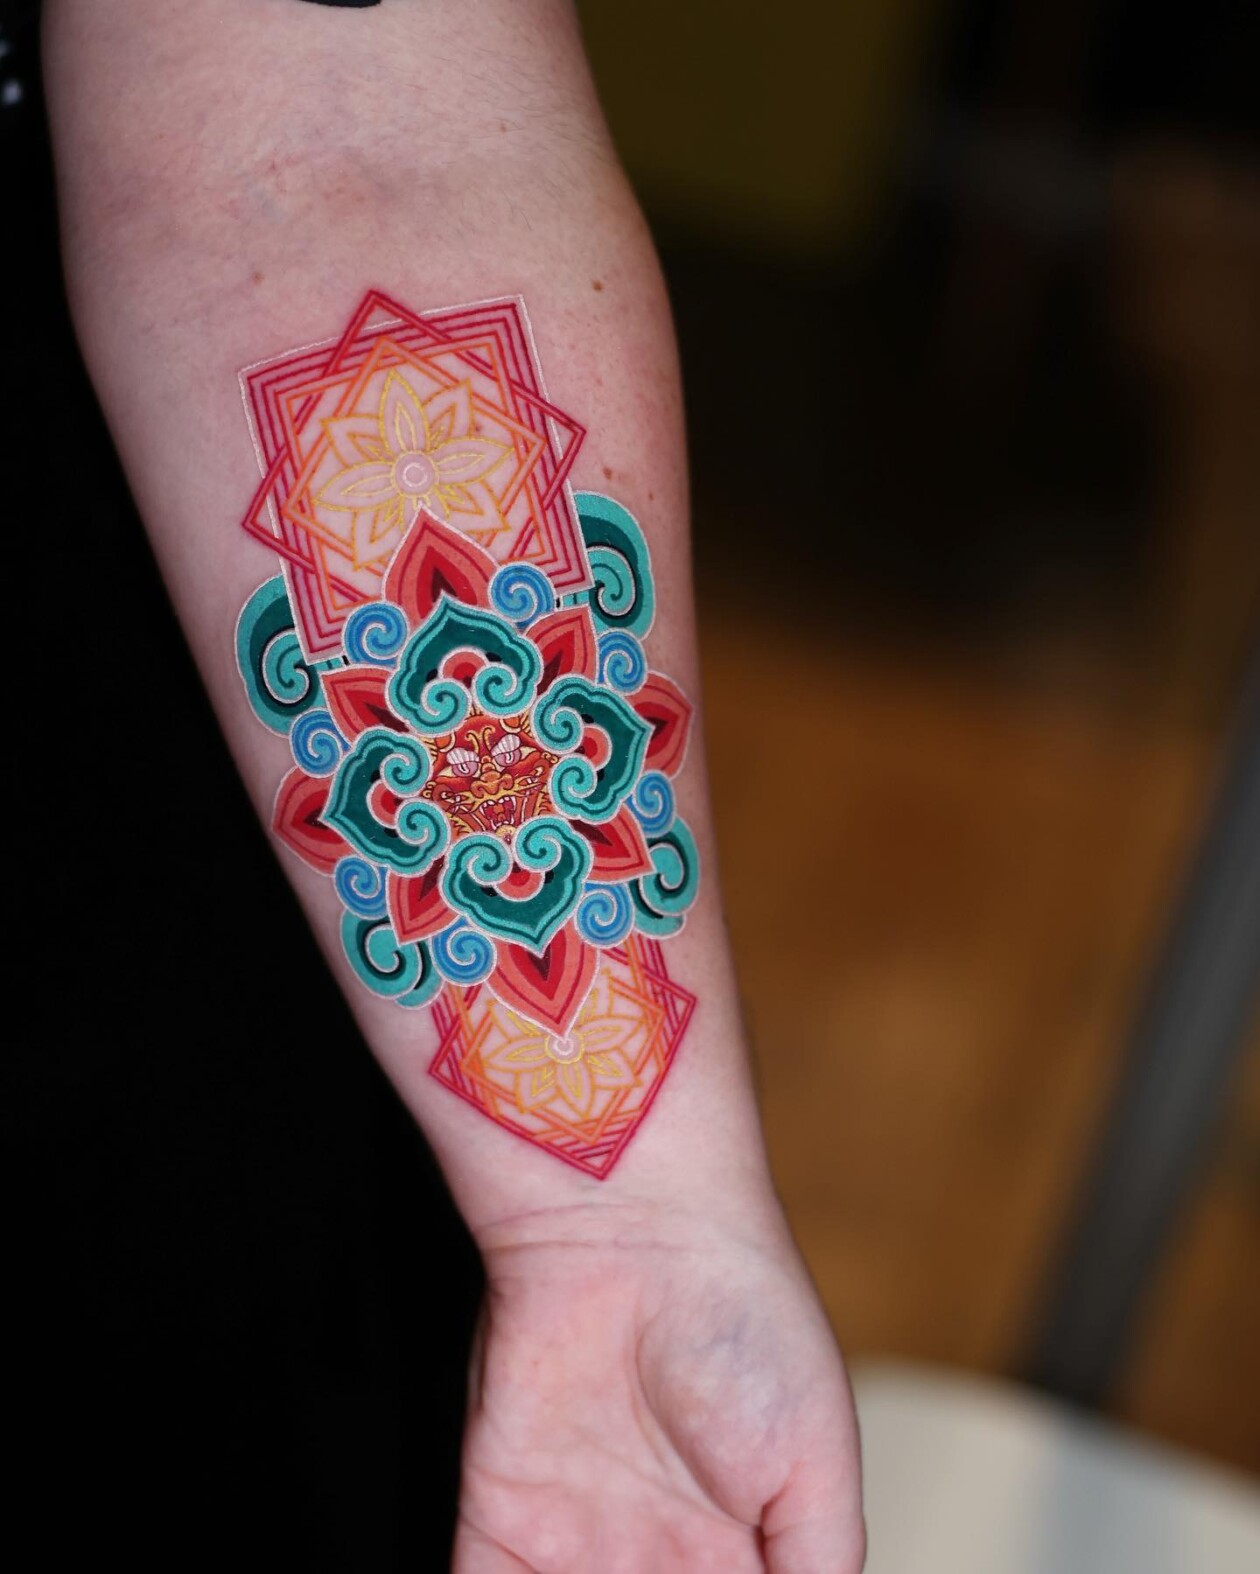 Vibrant Tattoos With Densely Layered Patterns By Korean Artist Pittakkm (2)